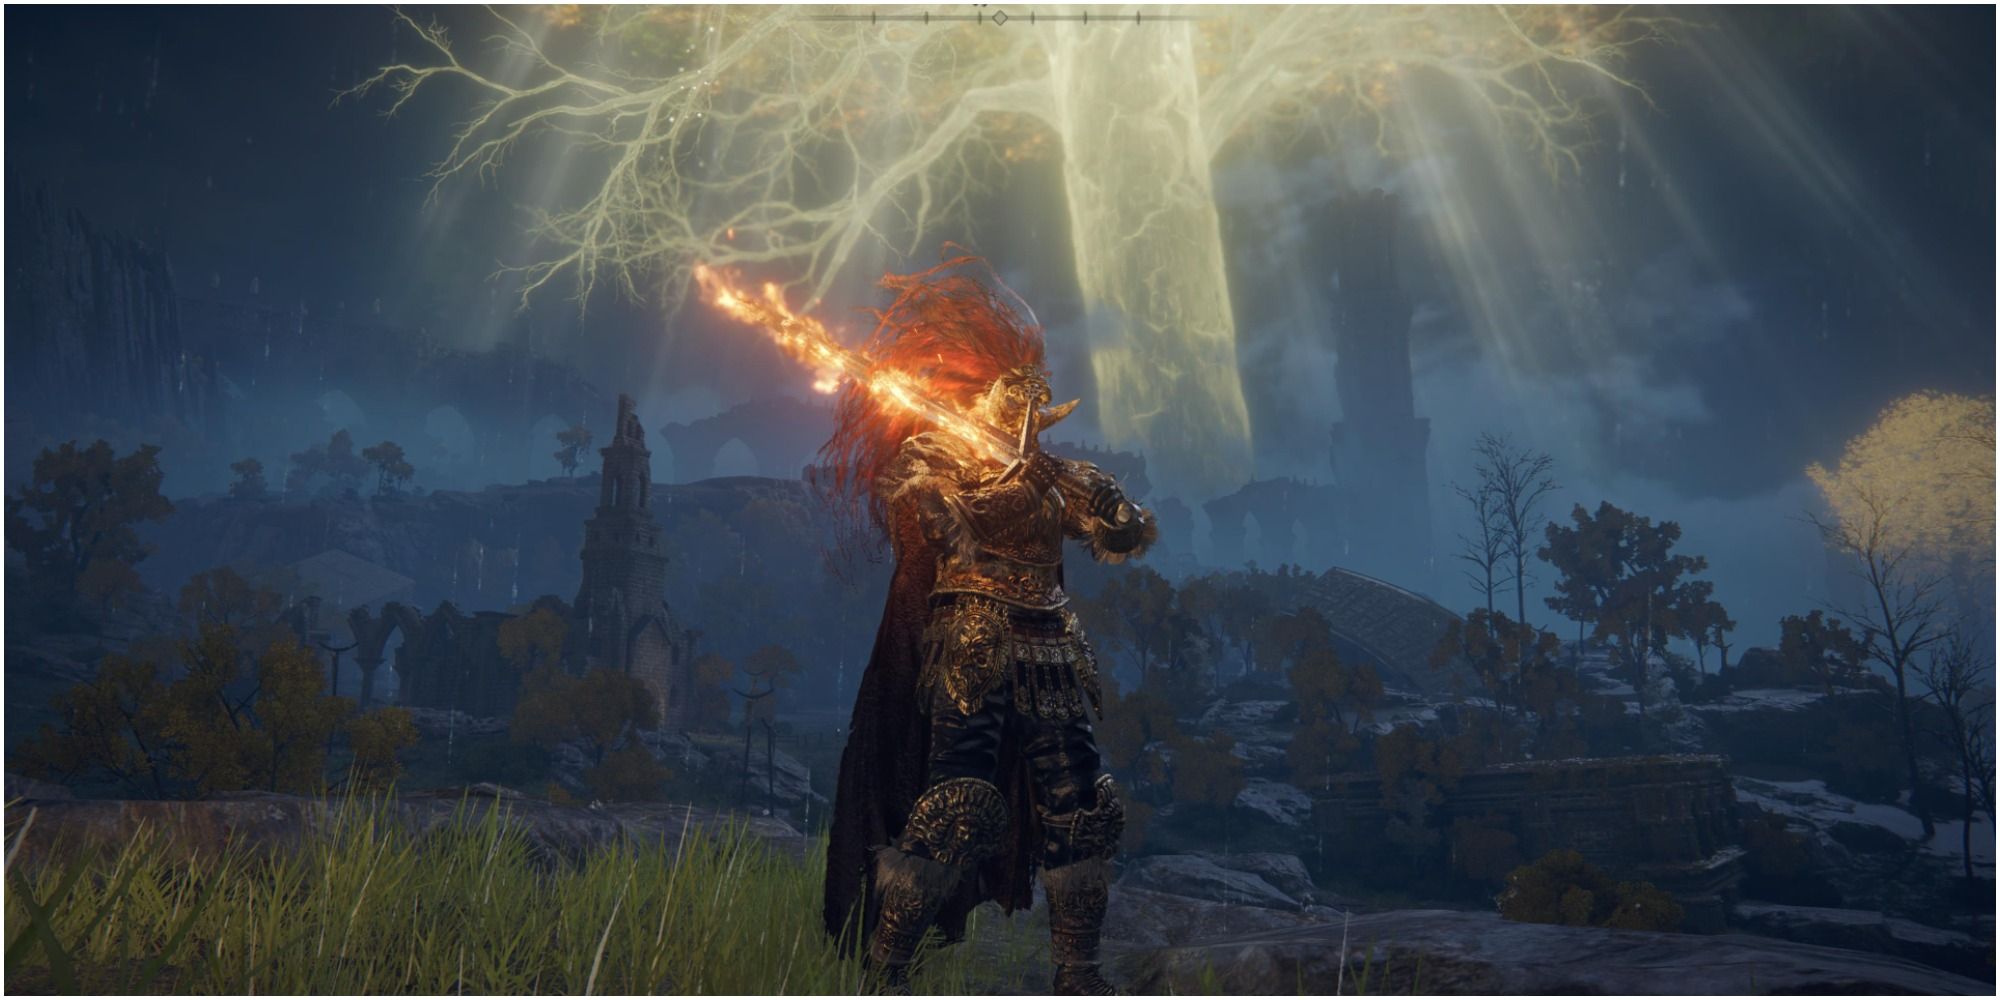 The Tarnished holds a Flaming Claymore in Elden Ring.